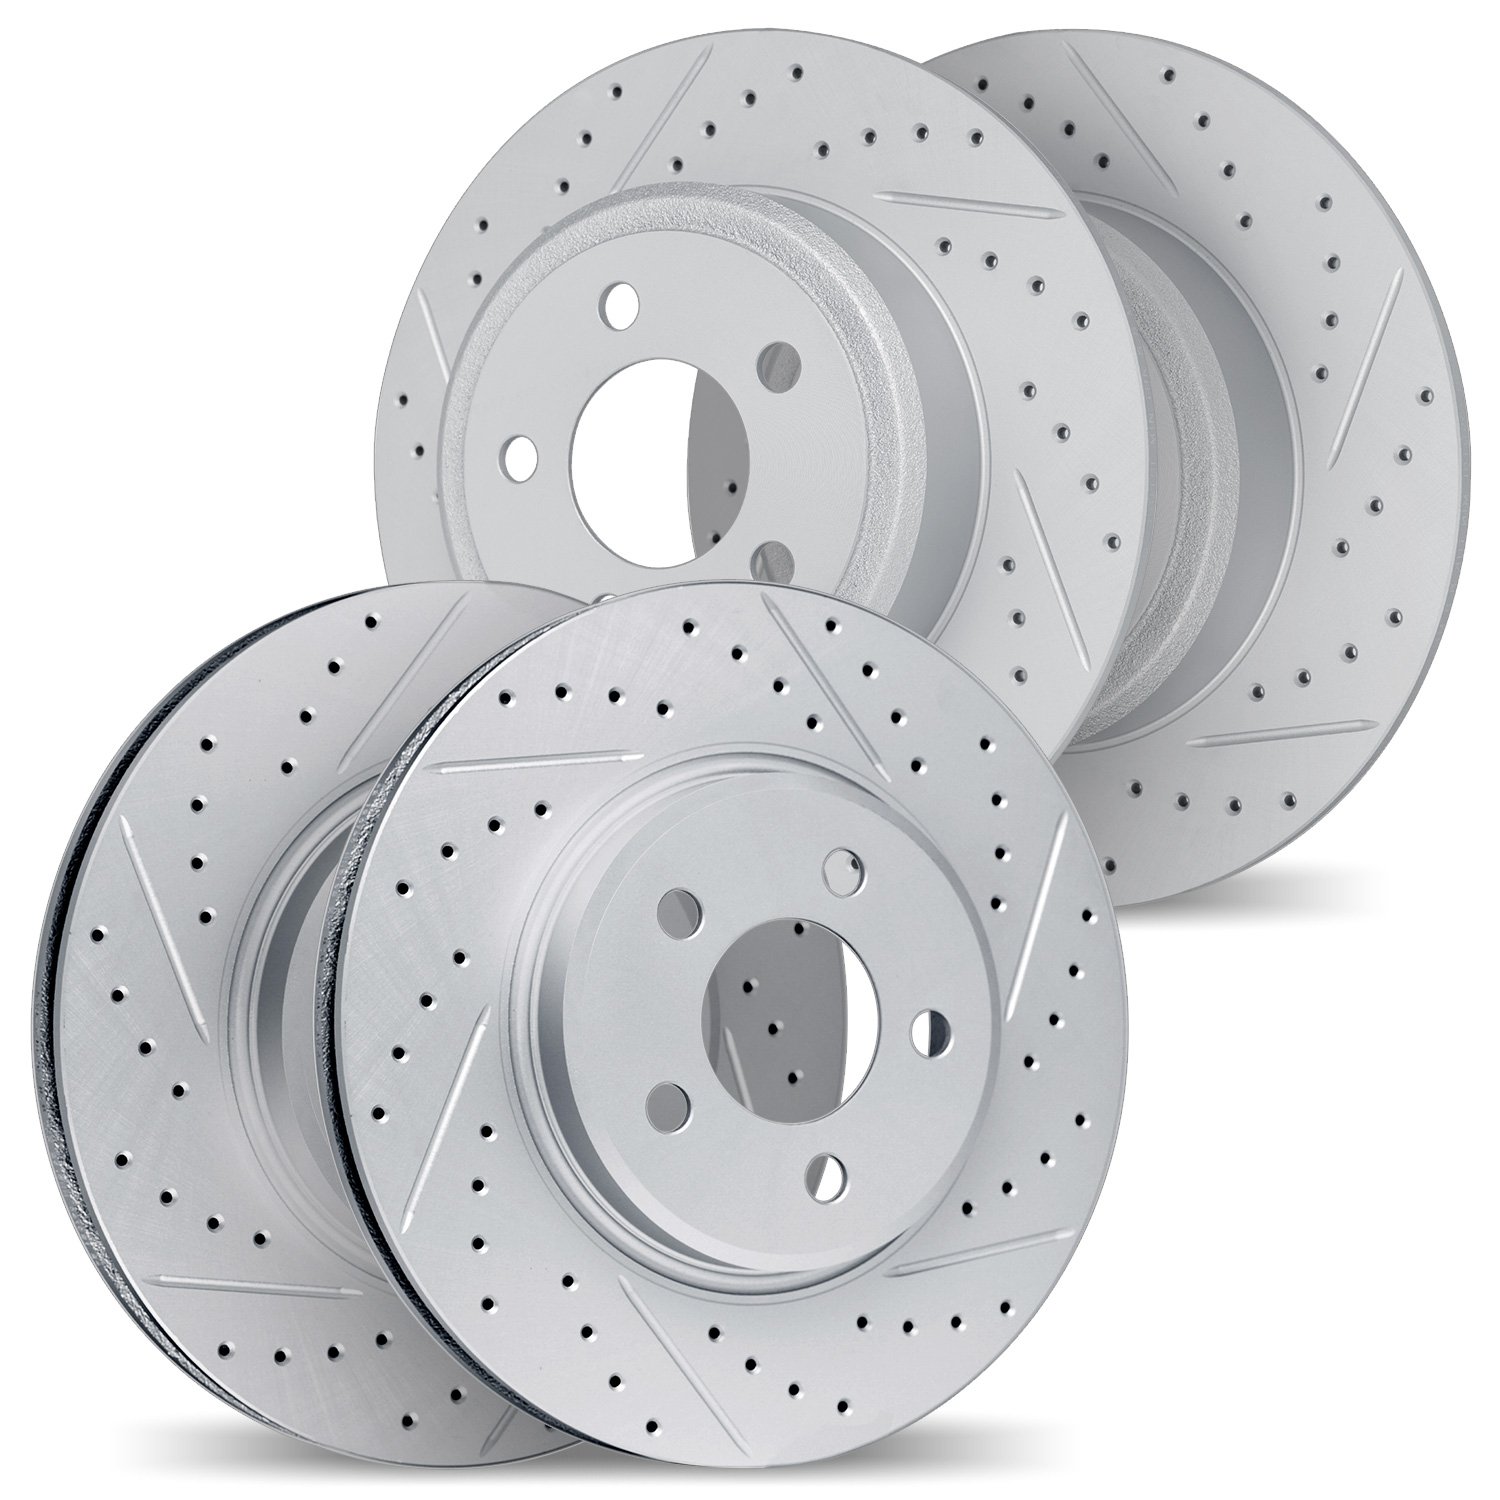 2004-03042 Geoperformance Drilled/Slotted Brake Rotors, 2019-2020 Kia/Hyundai/Genesis, Position: Front and Rear